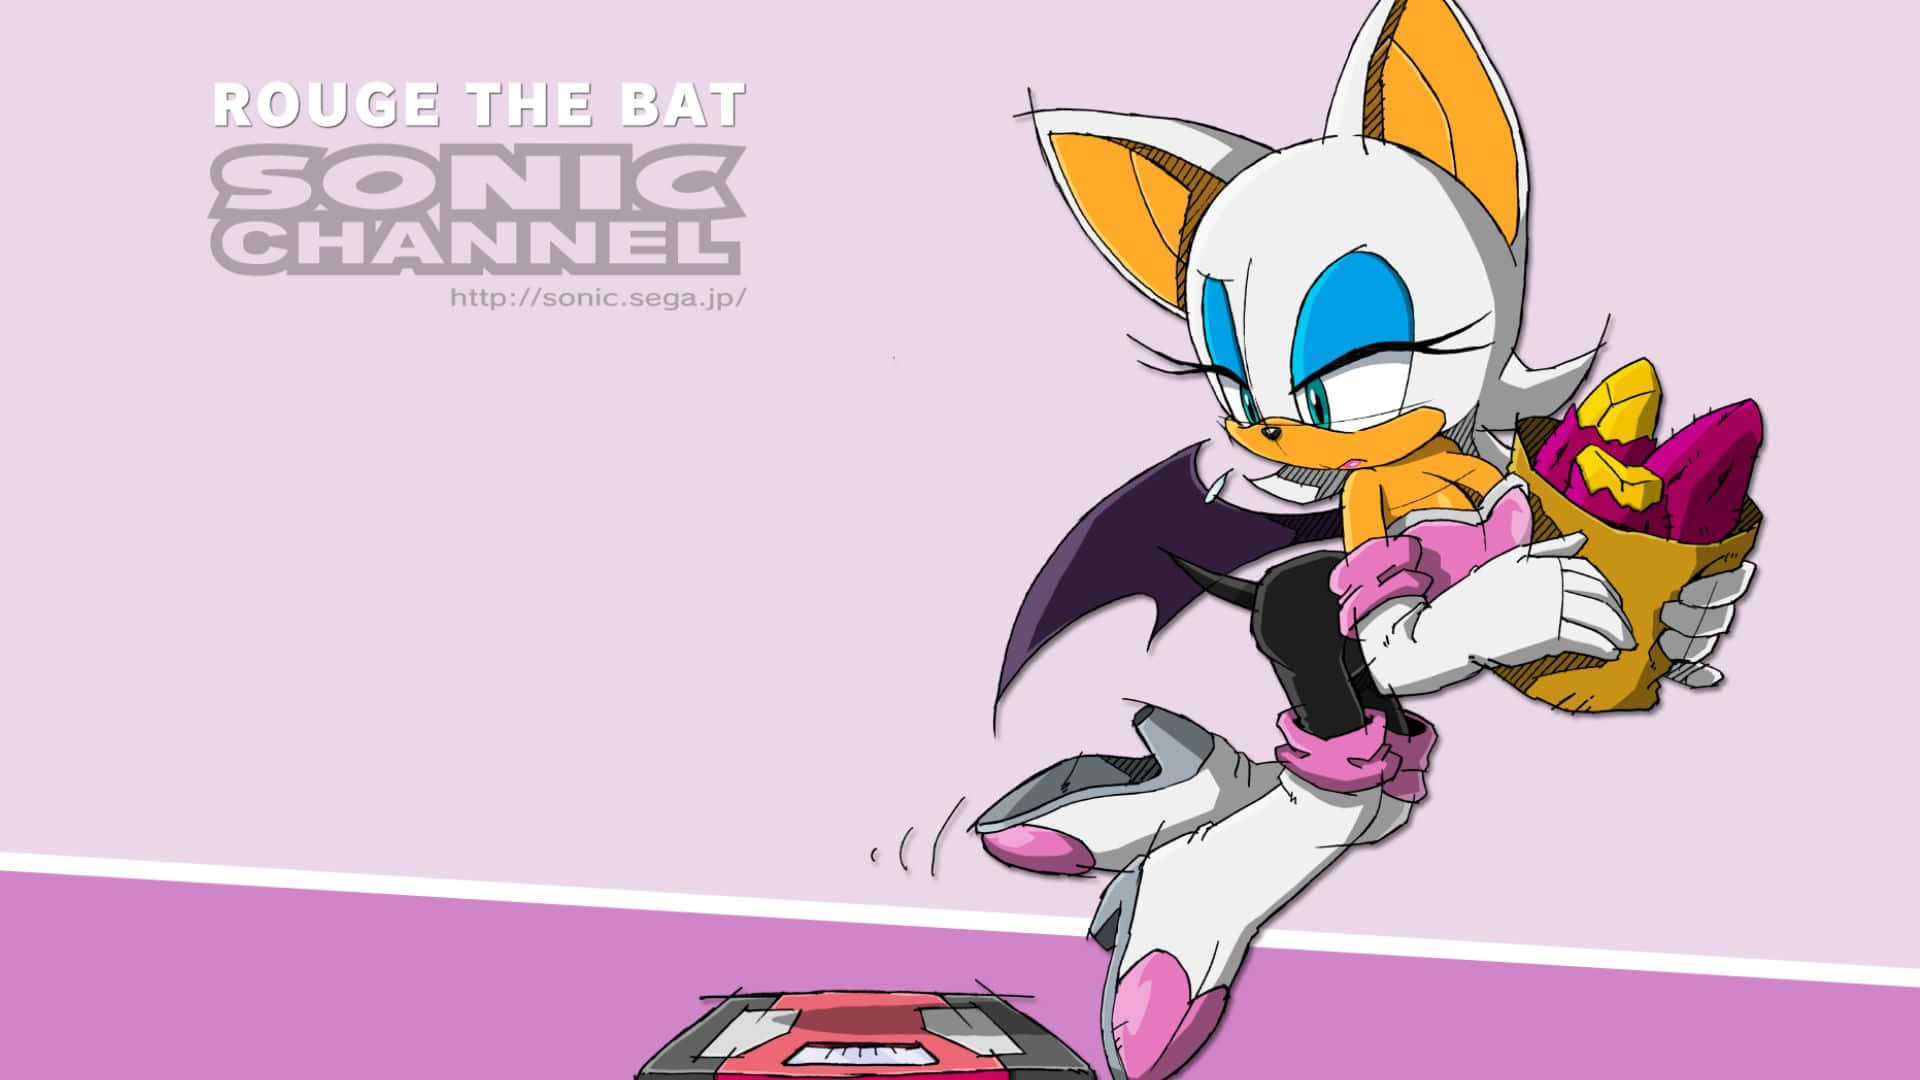 Rouge the Bat in action in a night scene Wallpaper